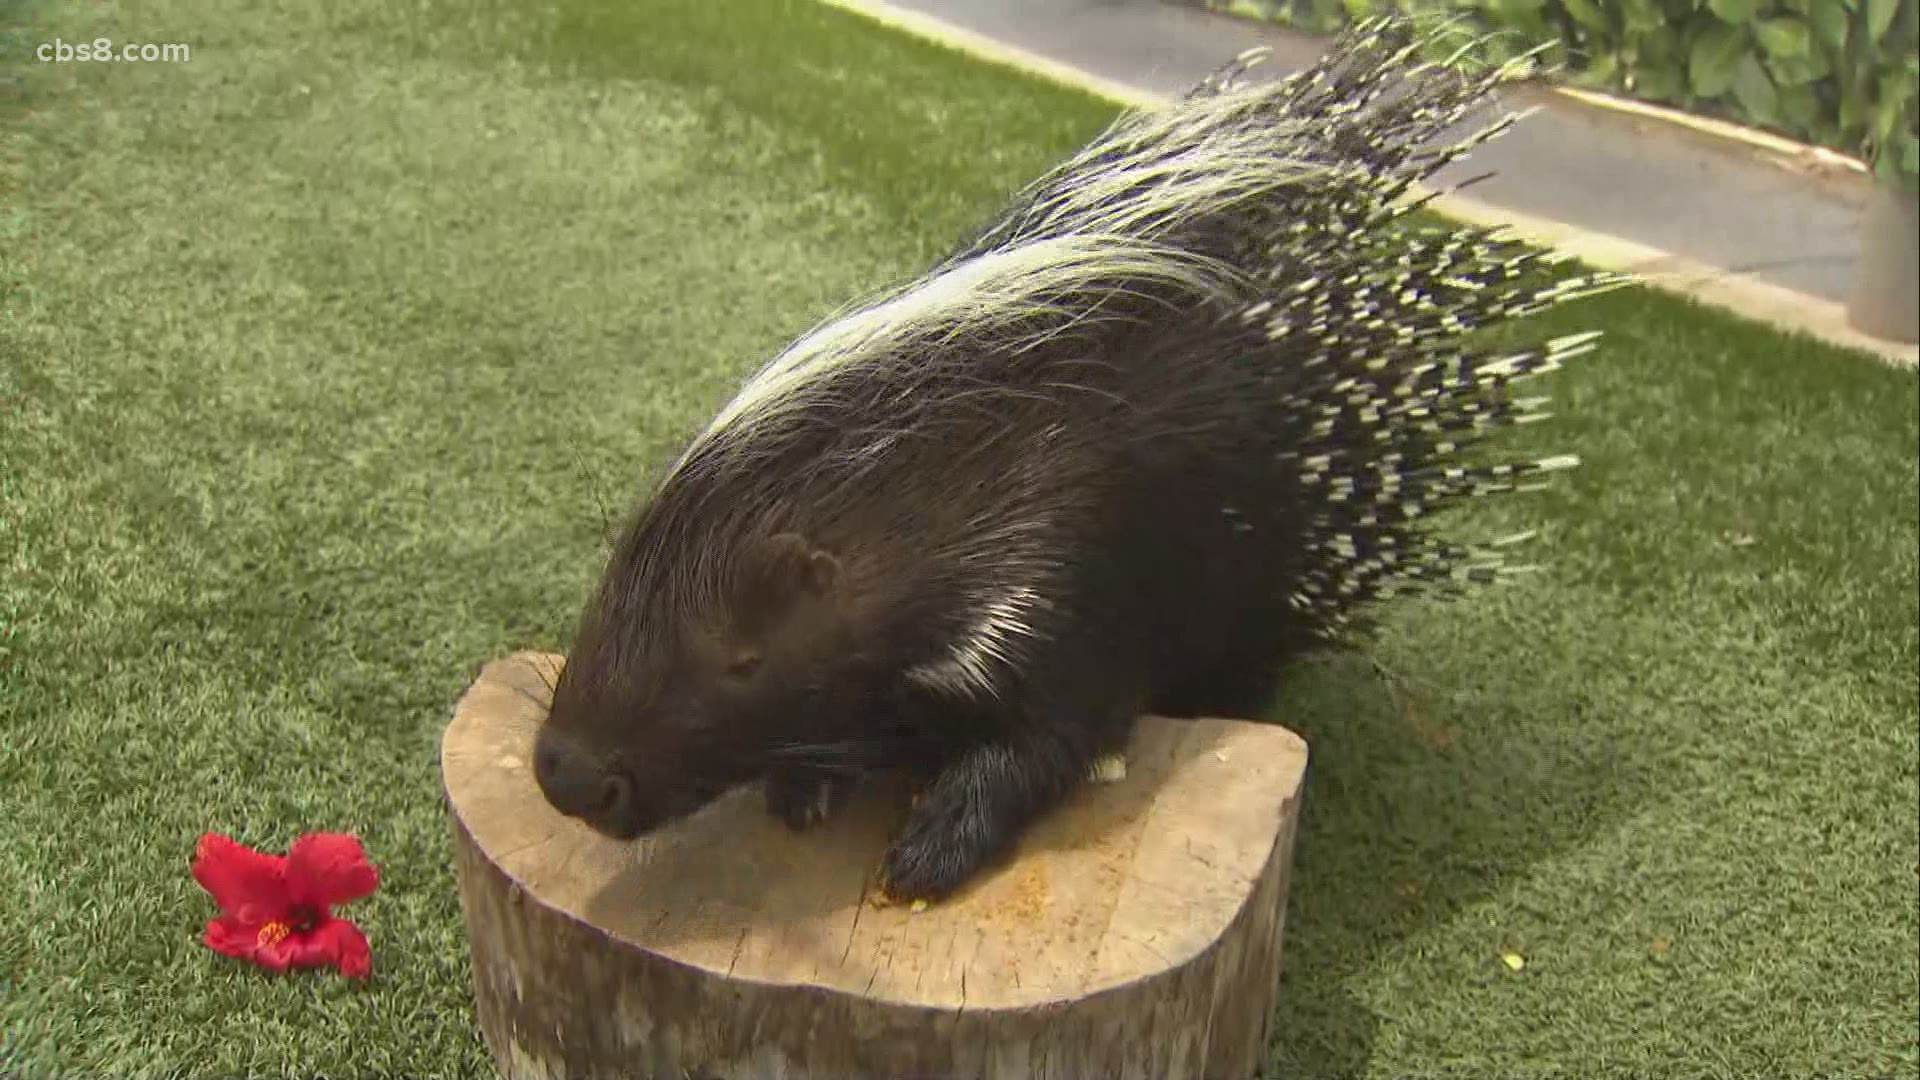 Friday’s Zoo Day segment were Cape porcupines! They are Africa's largest rodents, growing up to two and a half feet long and sometimes weighing more than 60 pounds.